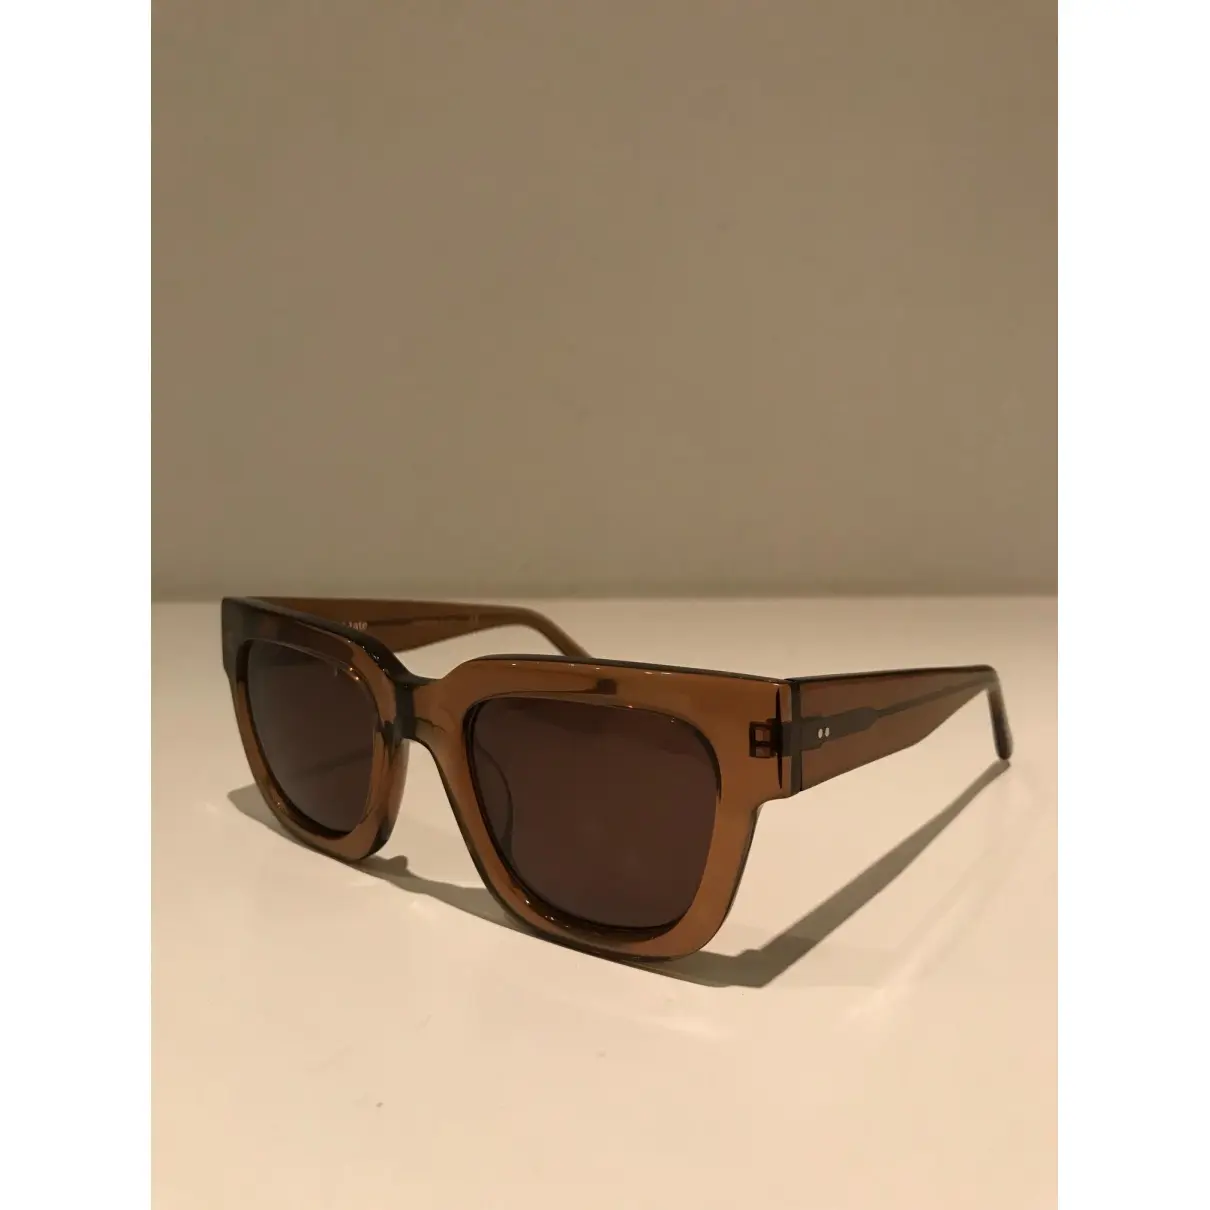 Buy Ace & Tate Sunglasses online